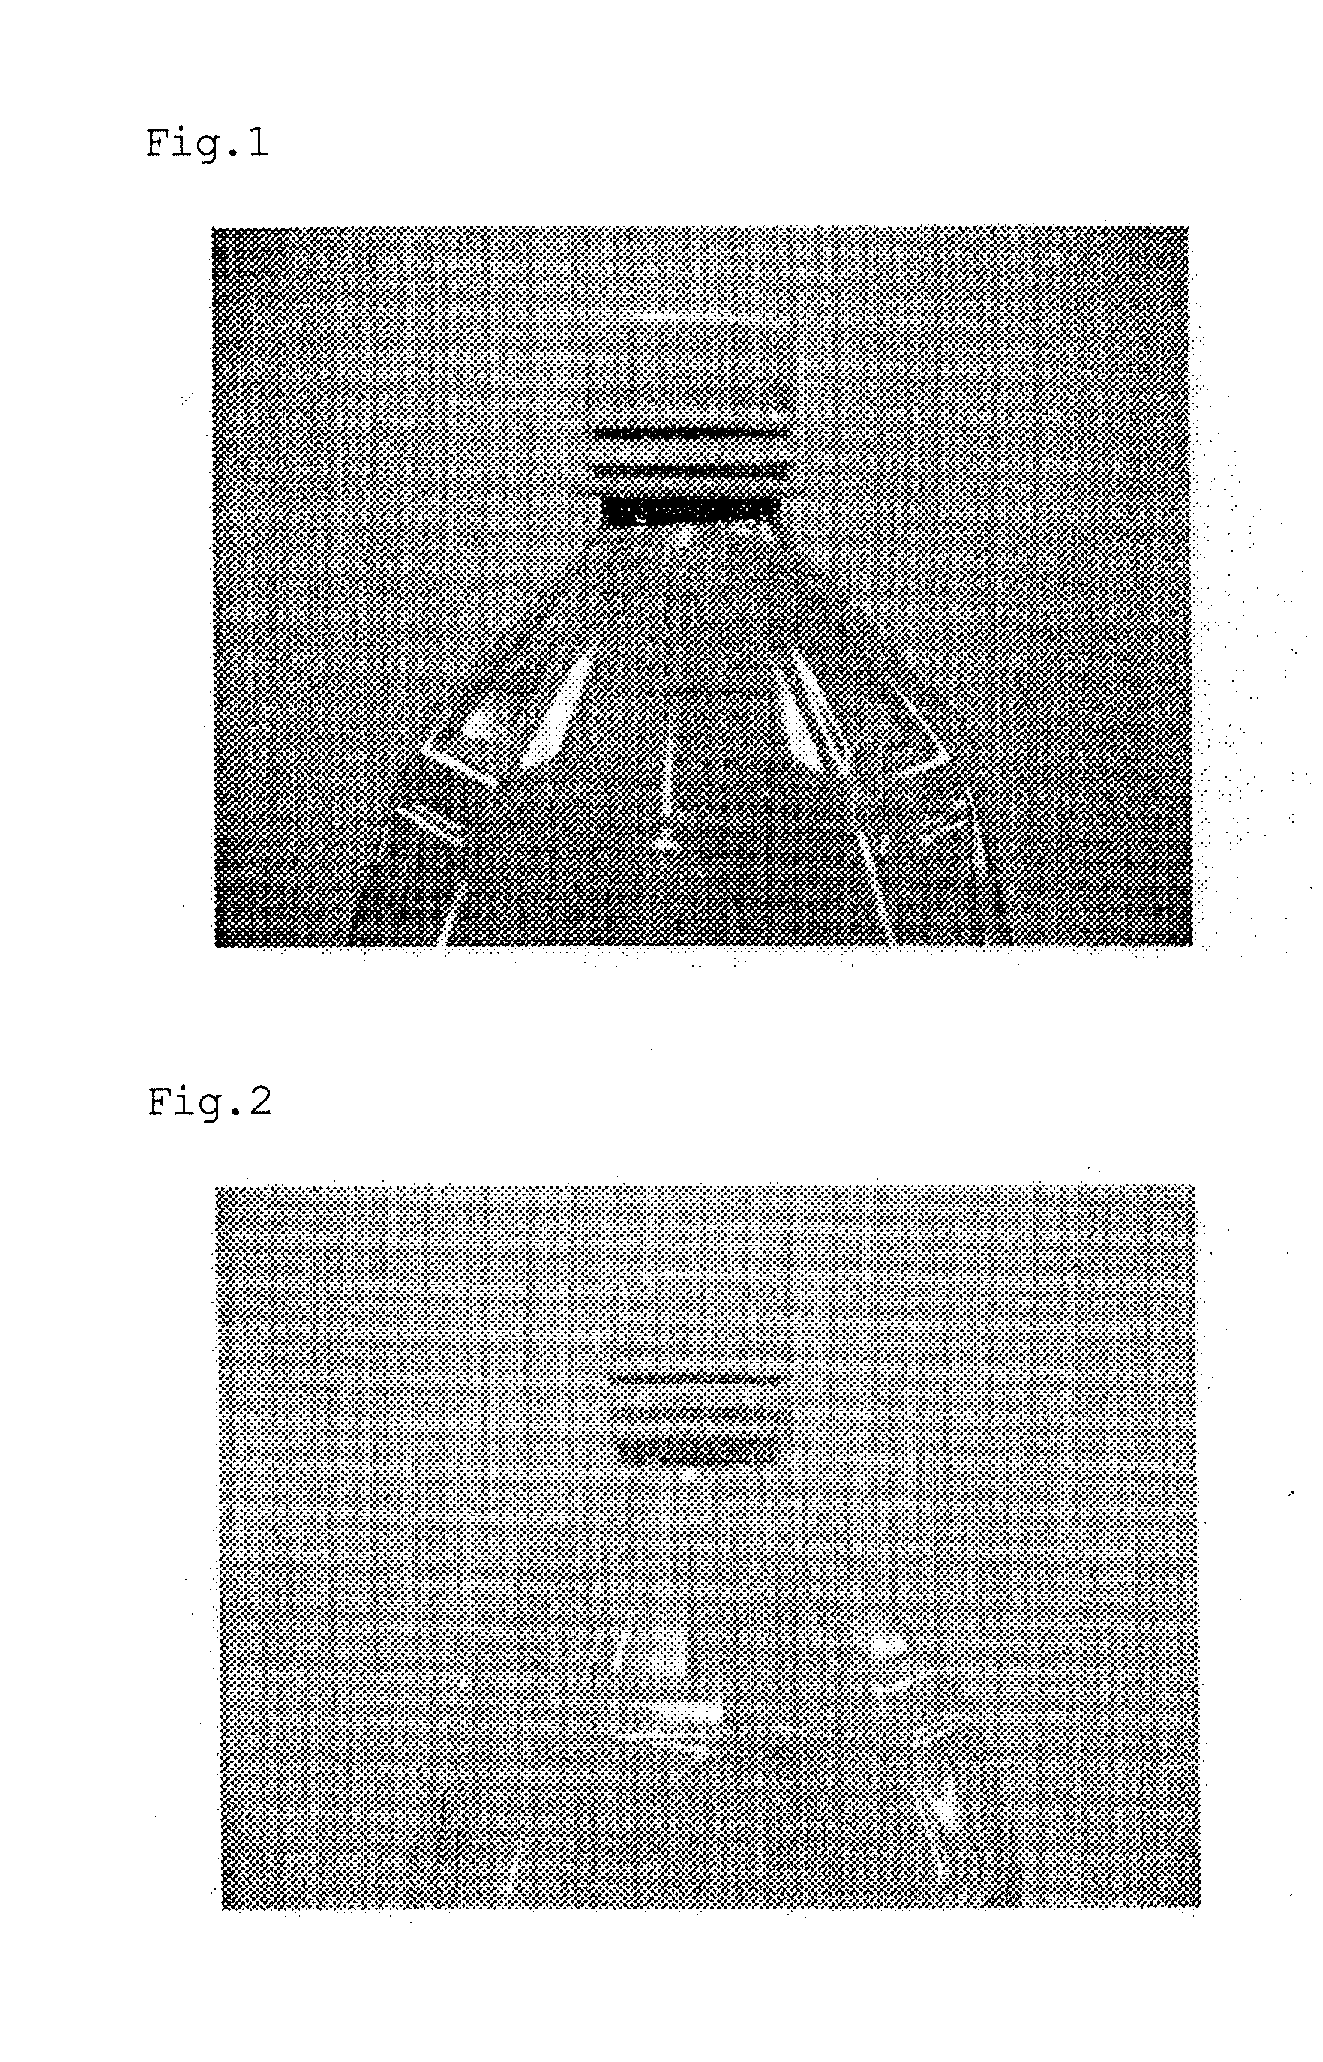 Method for preventing carotenoid pigment from adhering to container